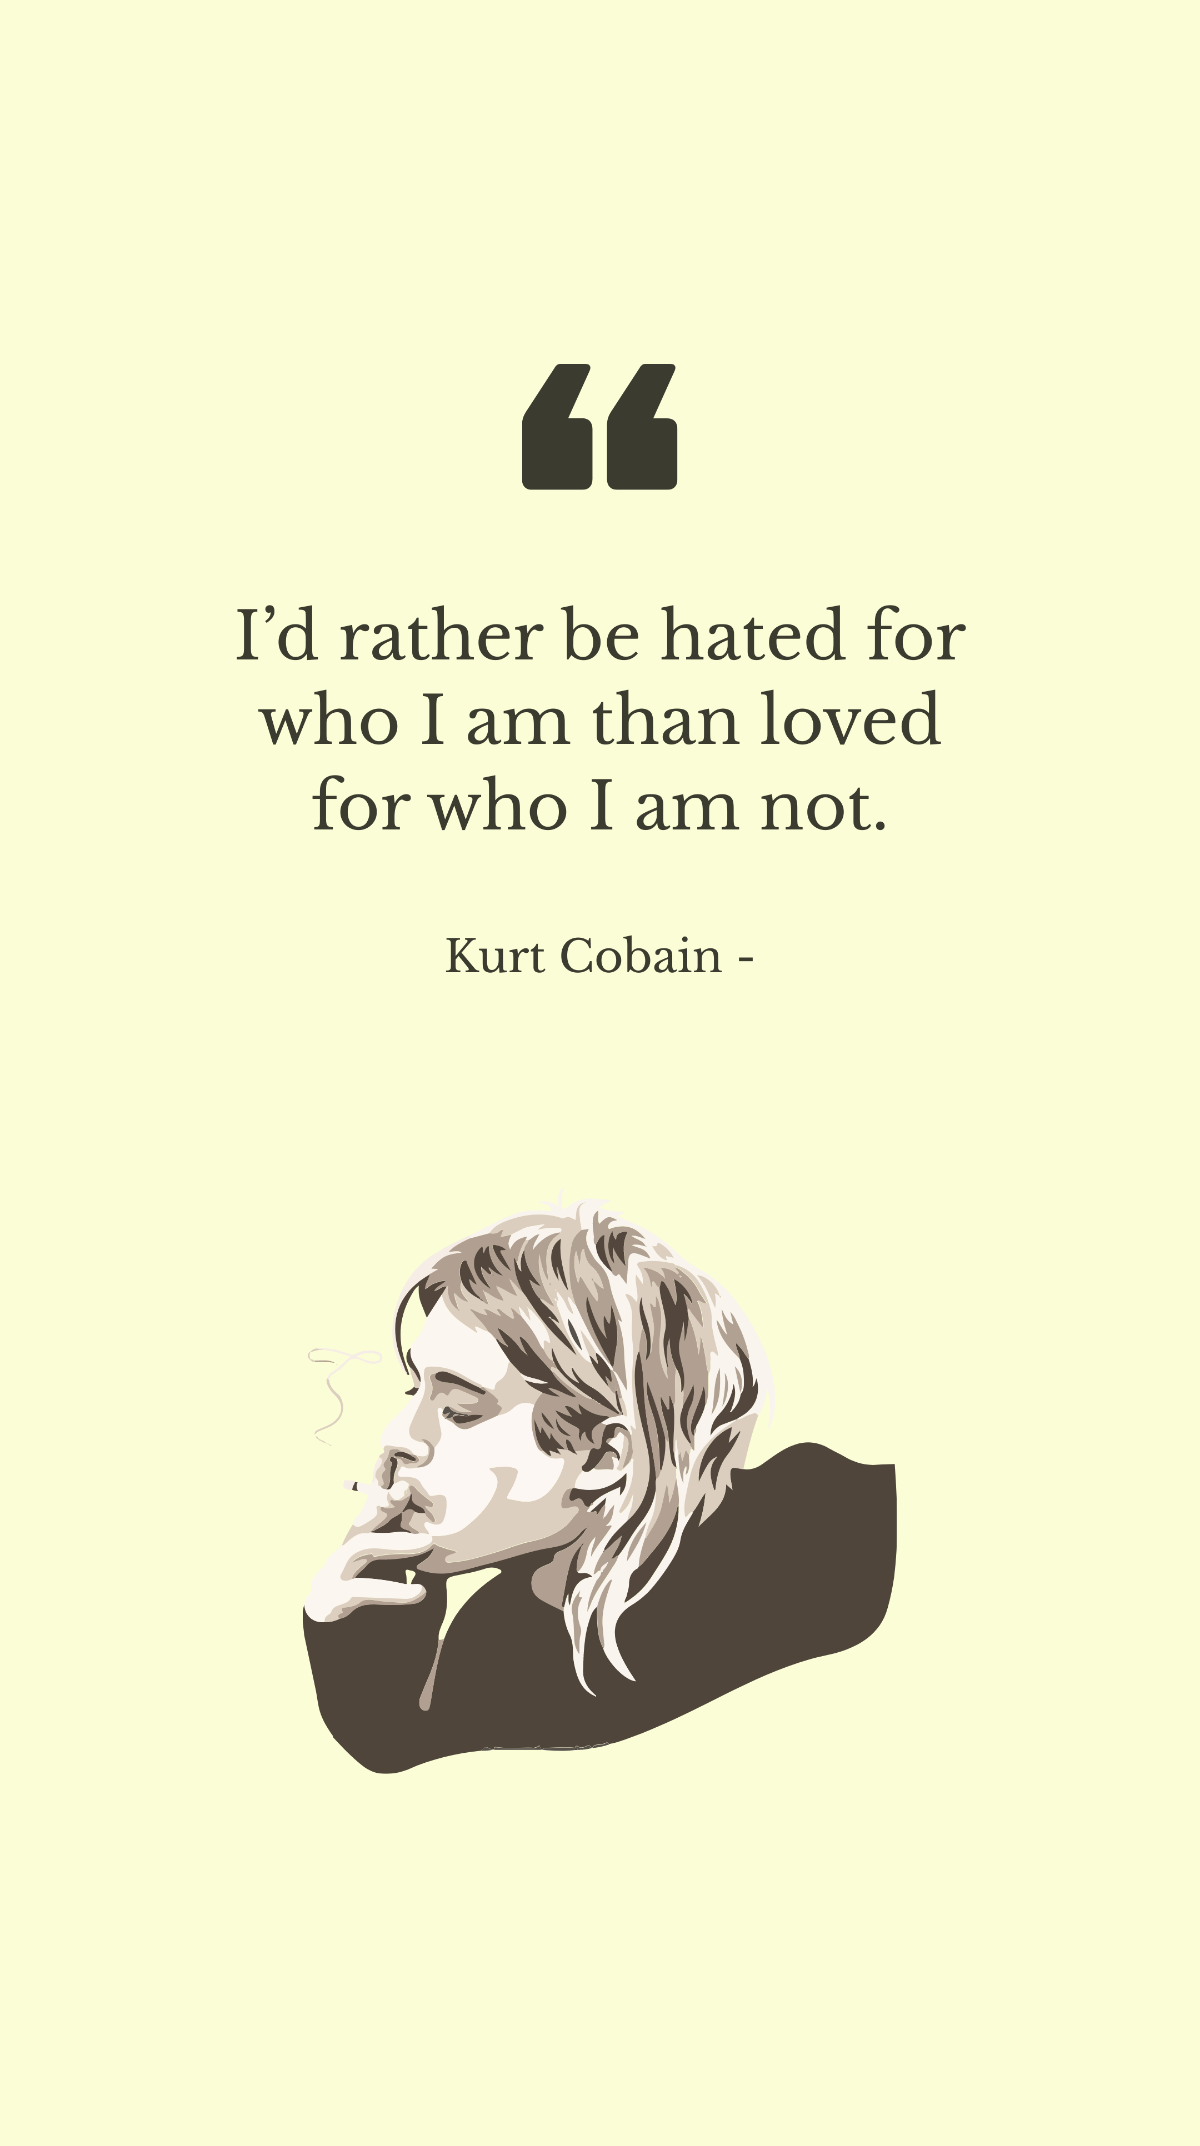 Kurt Cobain - I’d rather be hated for who I am than loved for who I am not.